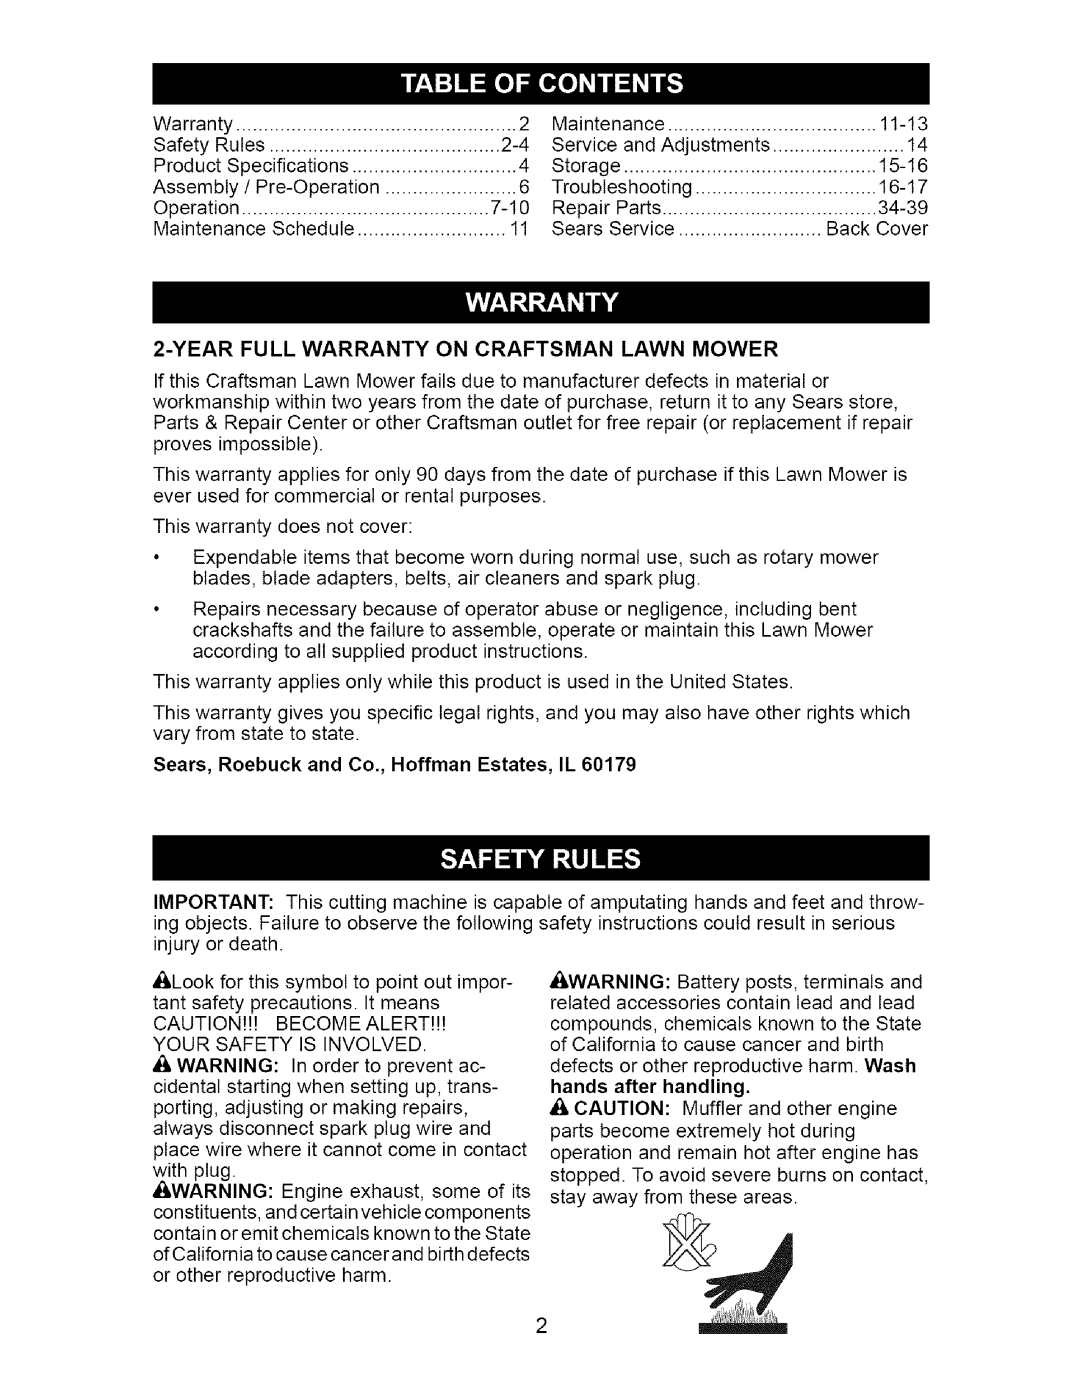 Craftsman 917.38514 owner manual Yearfull Warranty On Craftsman Lawn Mower, Sears, Roebuck and Co., Hoffman Estates, IL 